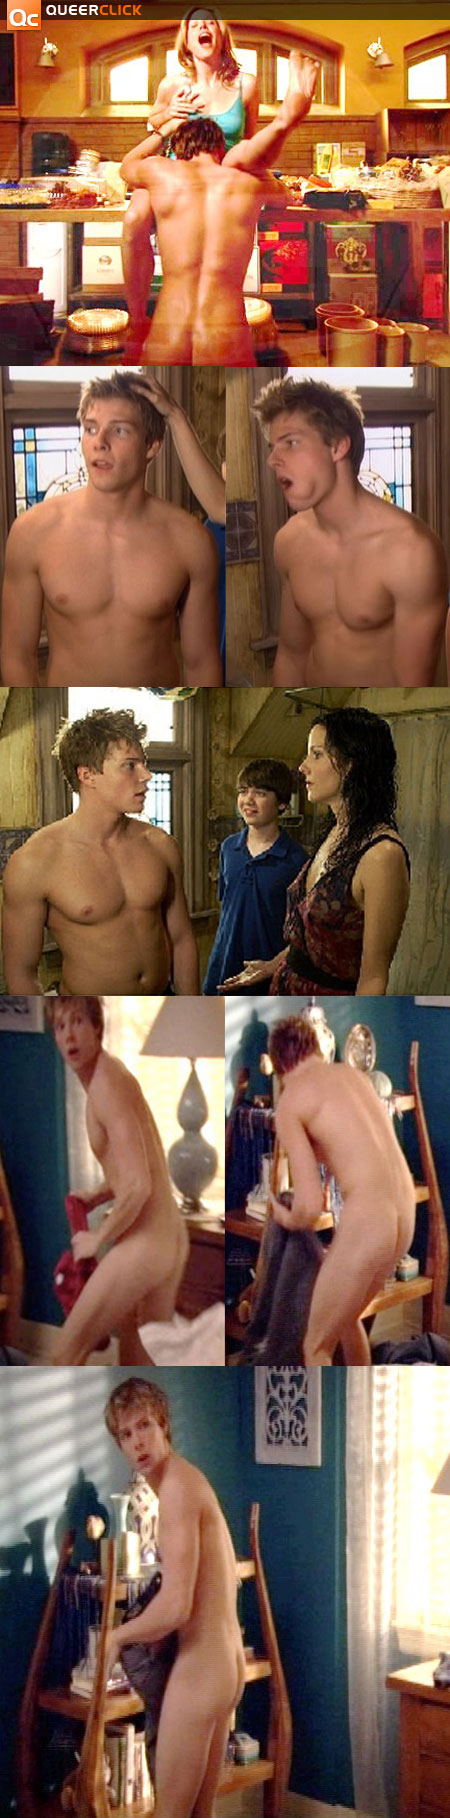 clinton scarfe recommends hunter parrish nude pic